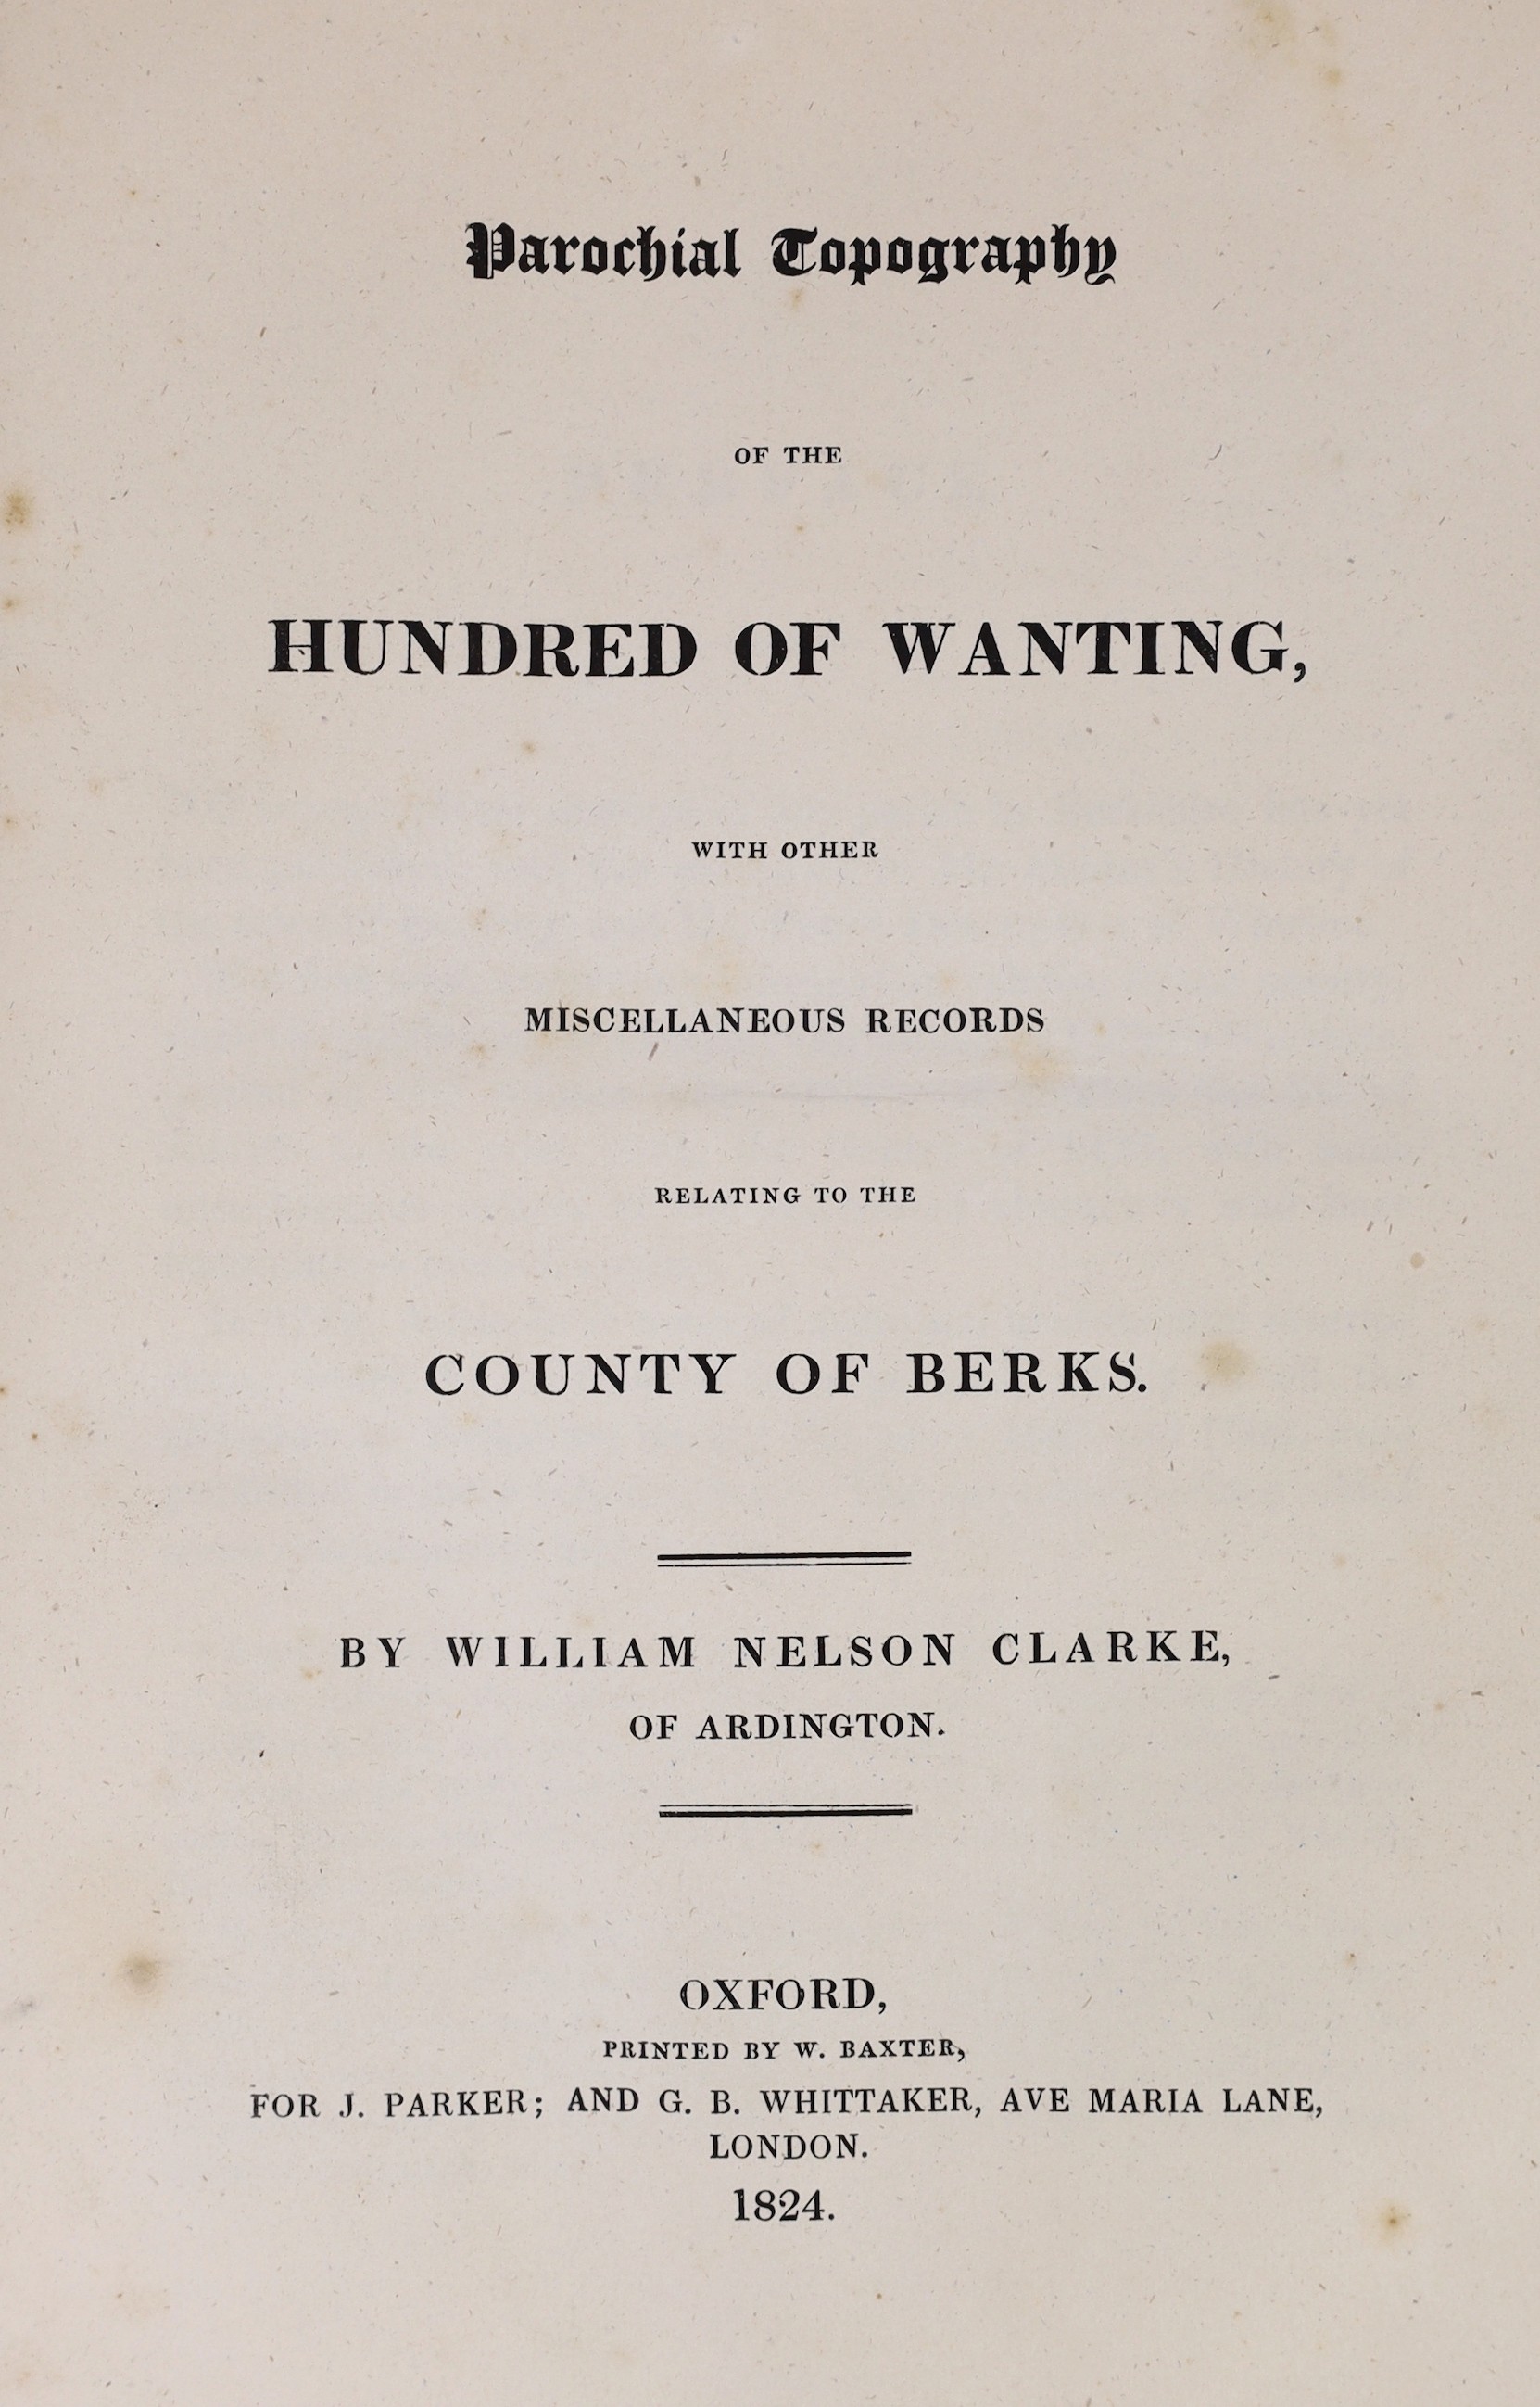 BERKS: Clarke, Williams Nelson - Parochial Topography of the Hundred of Wanting, with other miscellaneous records relating to the Country of Berks. 6 folded pedigrees; contemp. gilt-ruled and blind-decorated calf, panell